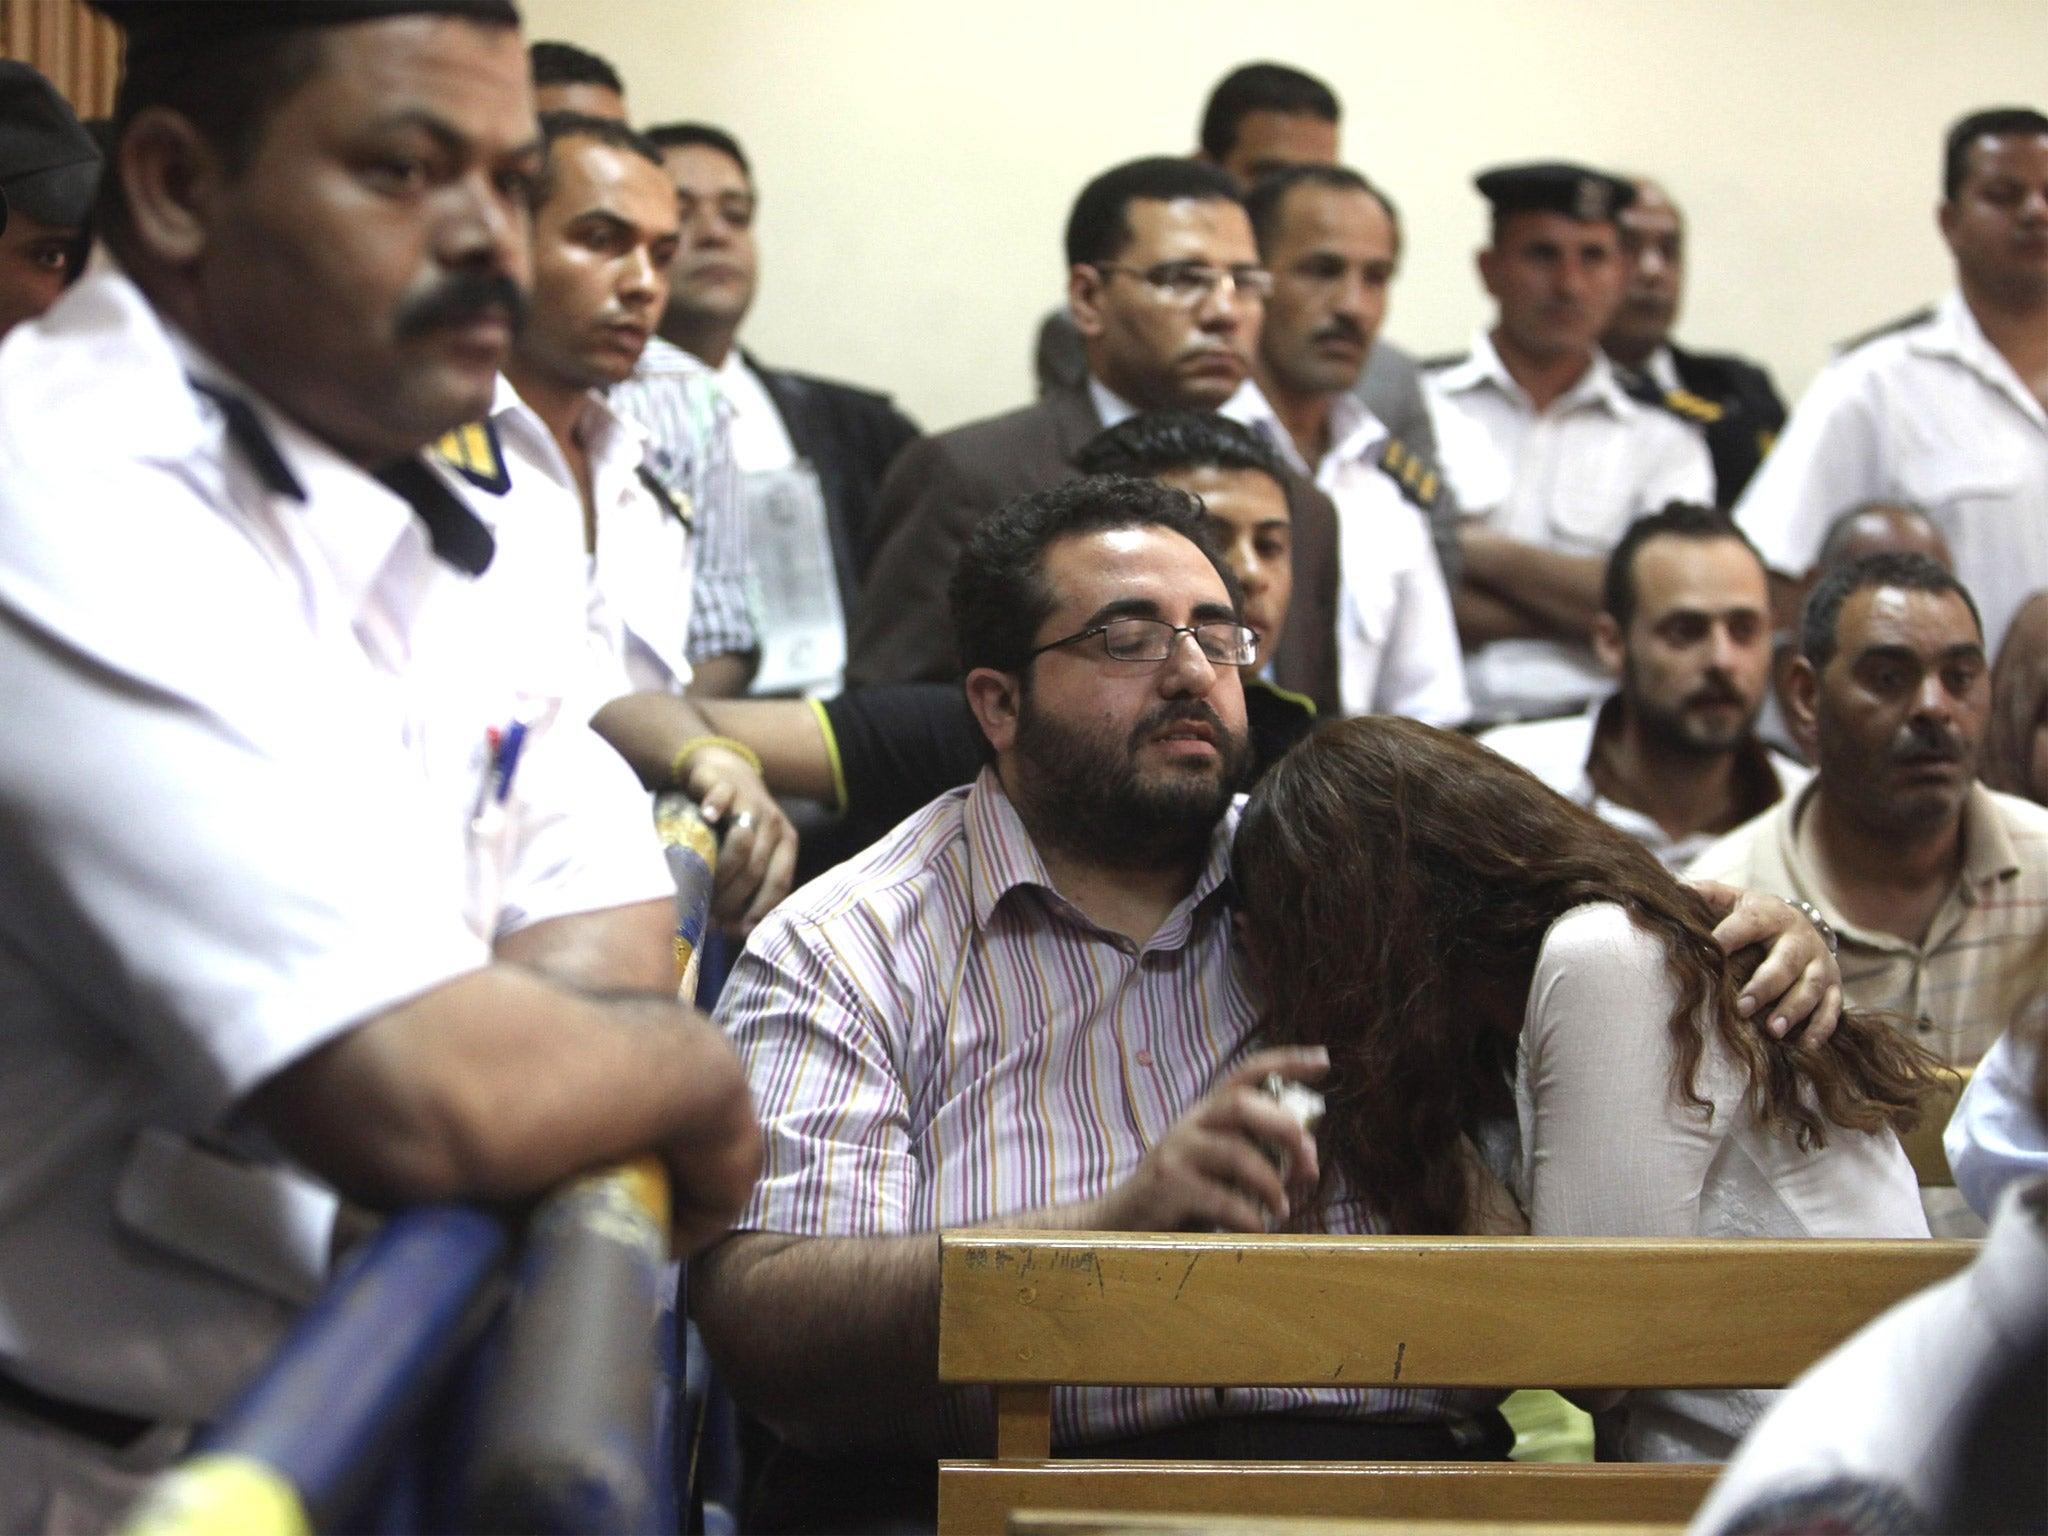 Friends of Egyptian suspects react as they listen to the judge's verdict